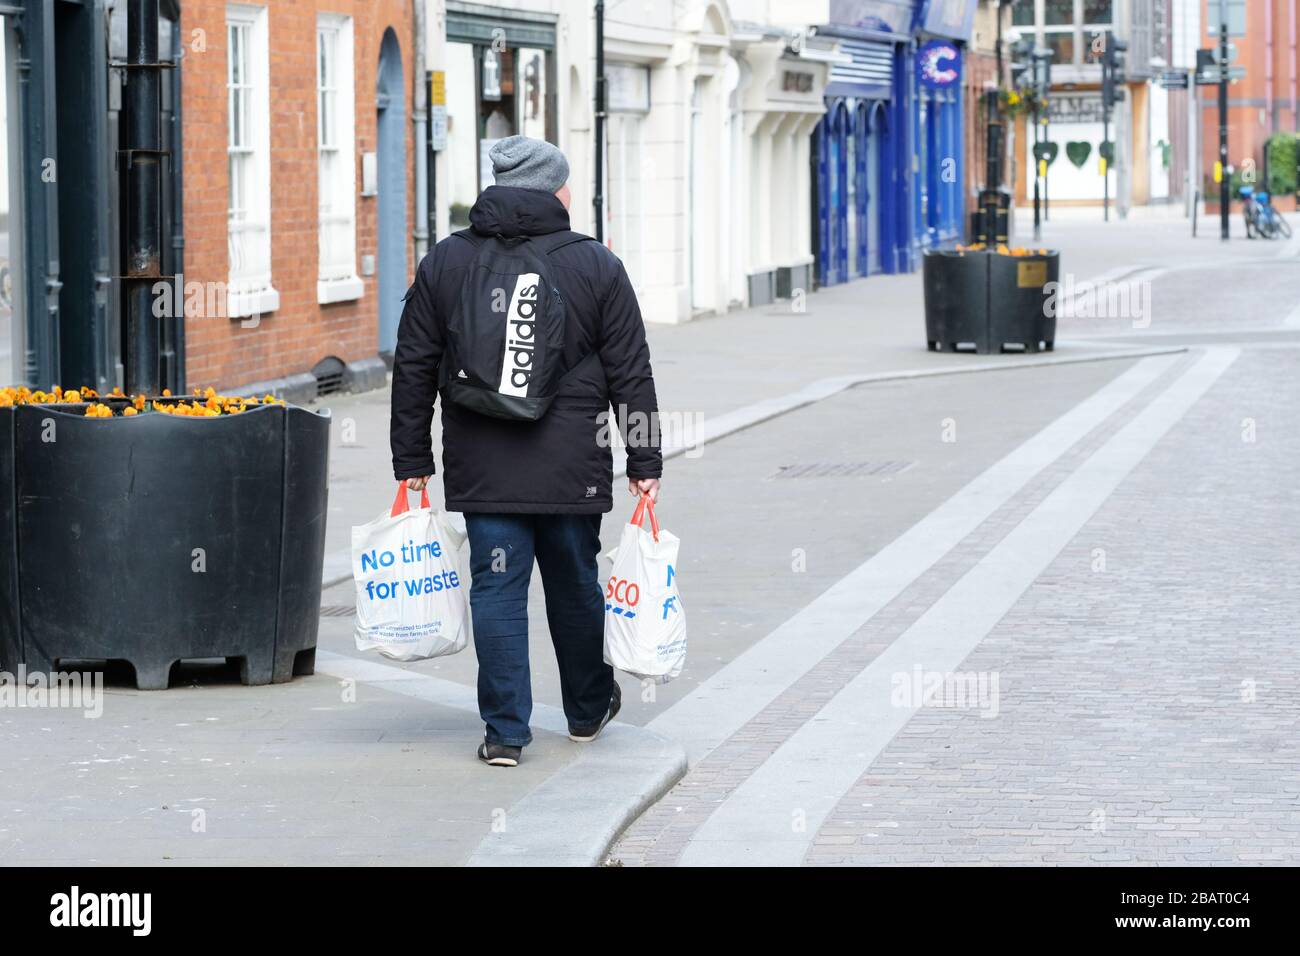 Hereford, Herefordshire, UK - Sunday 29th March 2020 - A shopper walks through a near deserted Hereford city centre with two bags of food shopping on Sunday as lockdown Britain continues into the Coronavirus Covid-19 crisis. Photo Steven May / Alamy Live News Stock Photo